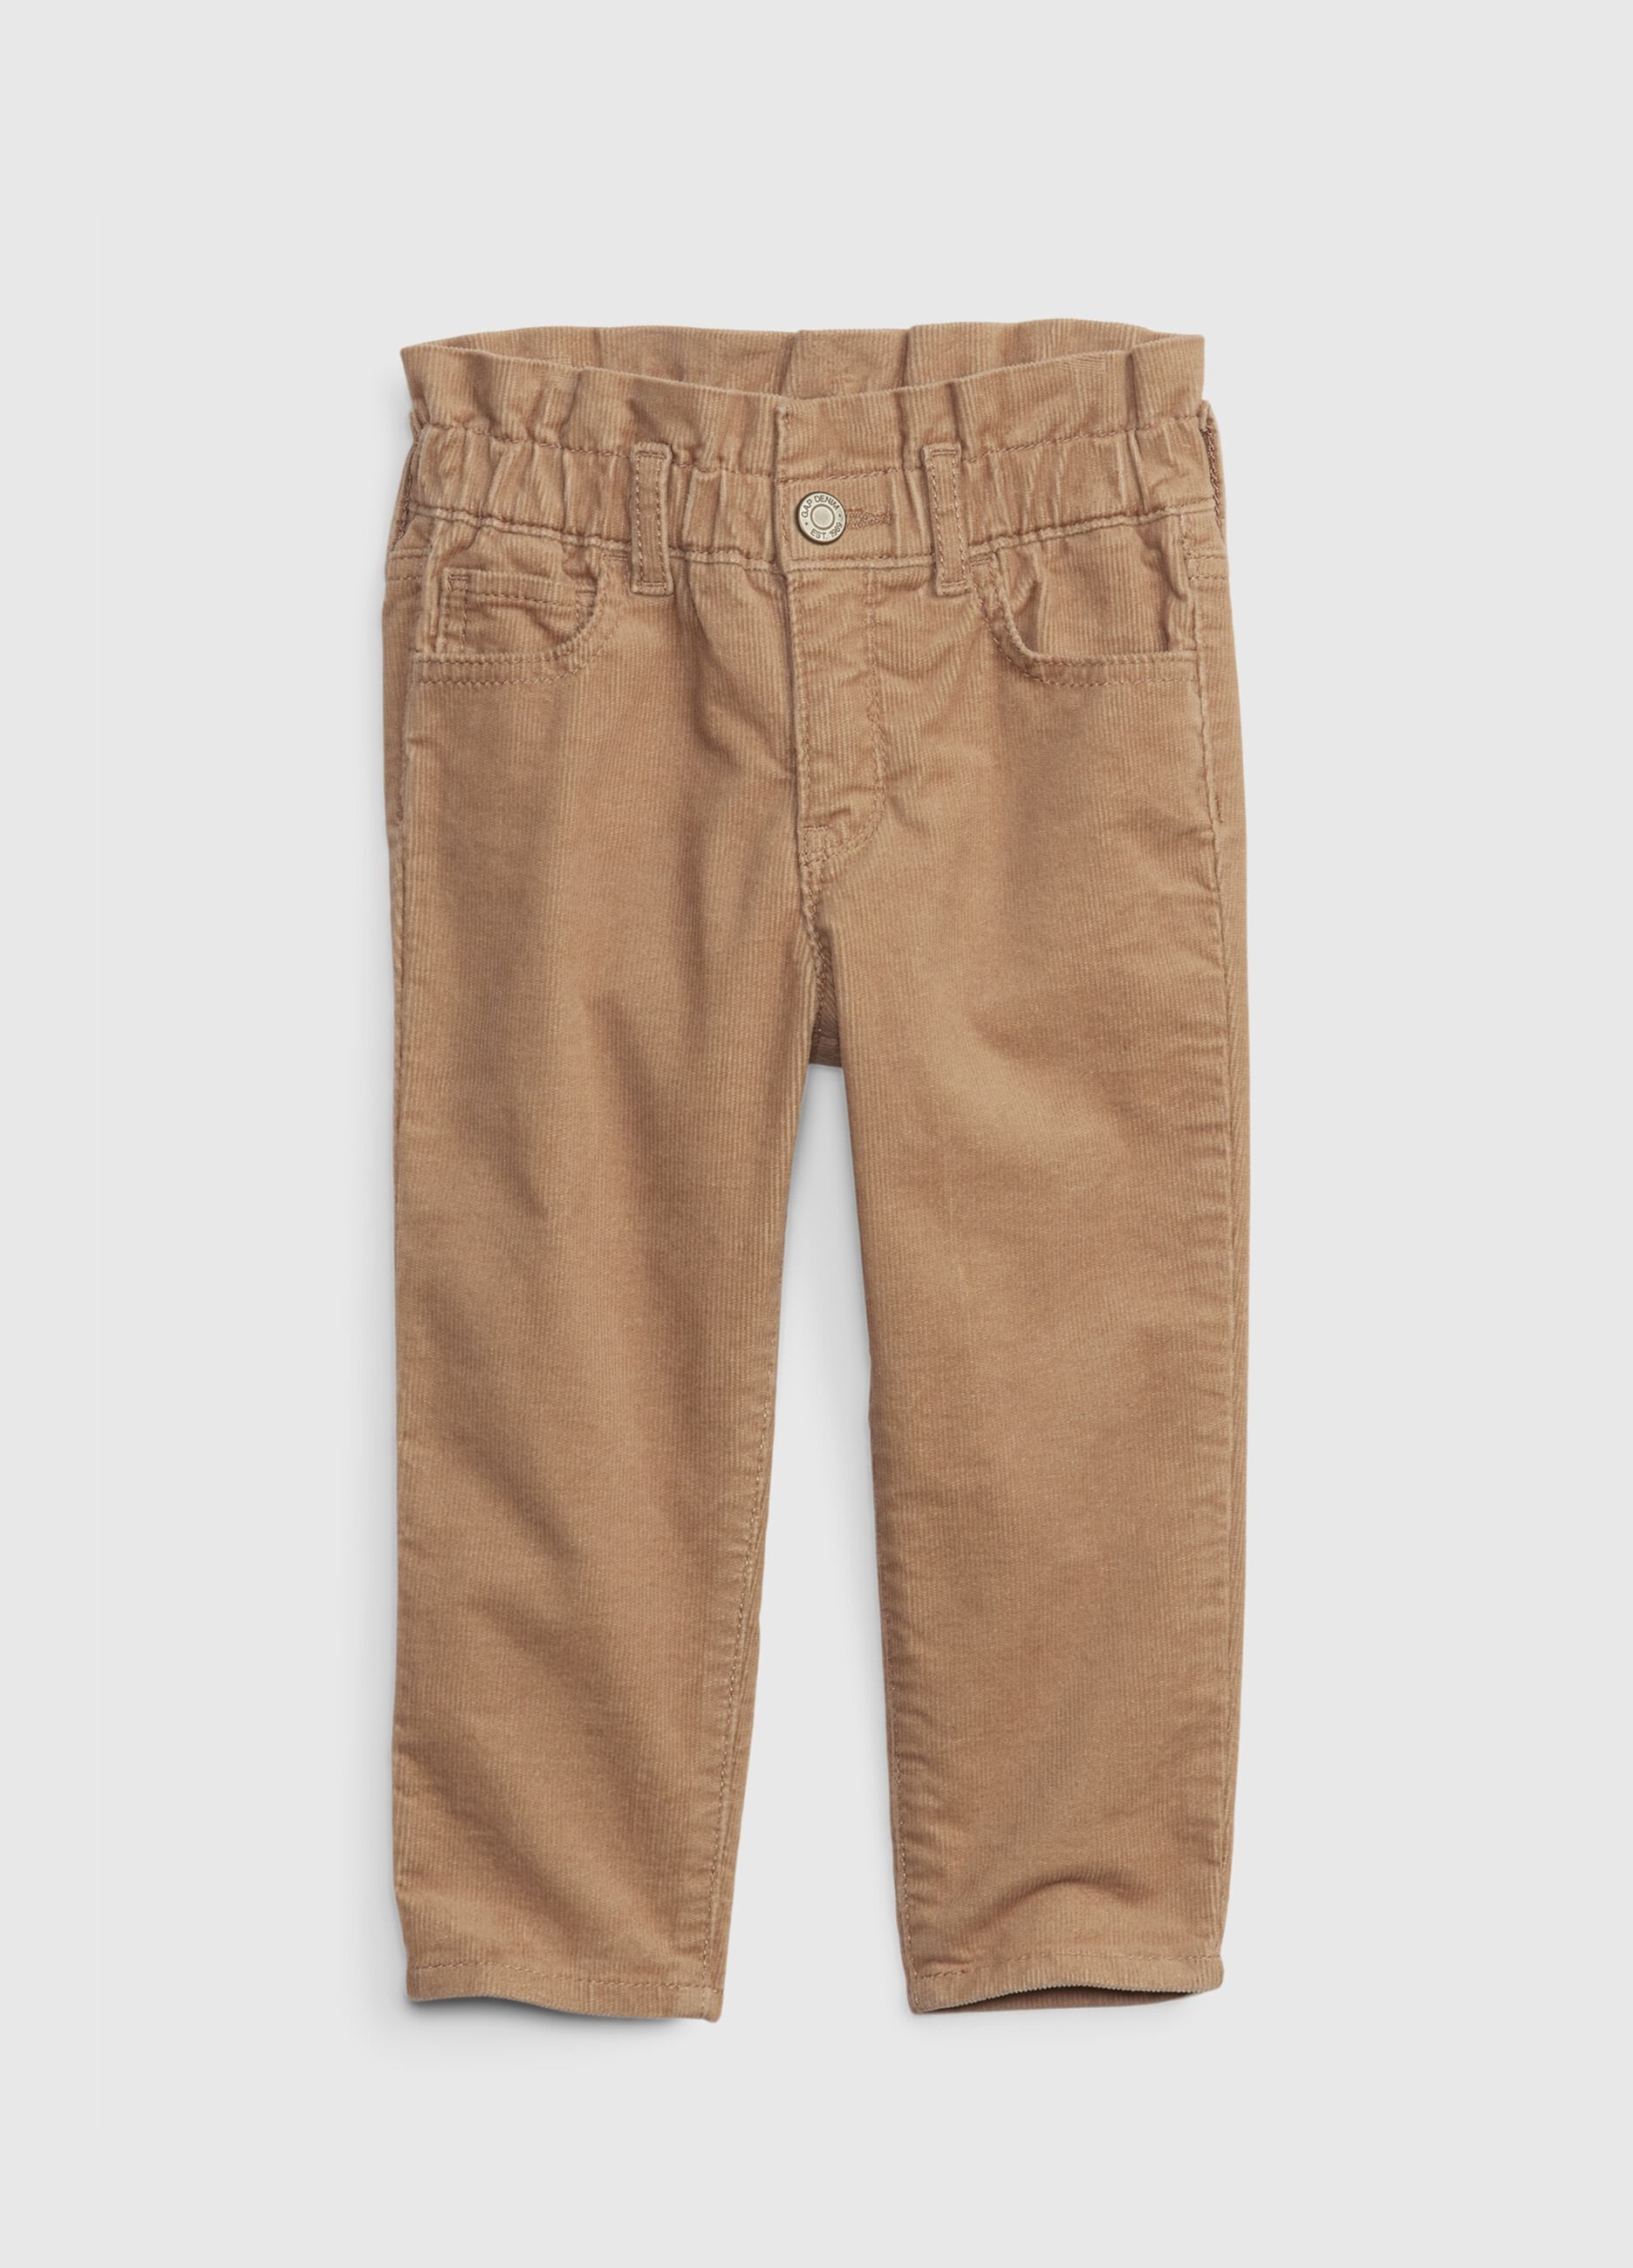 Mum-fit trousers in corduroy